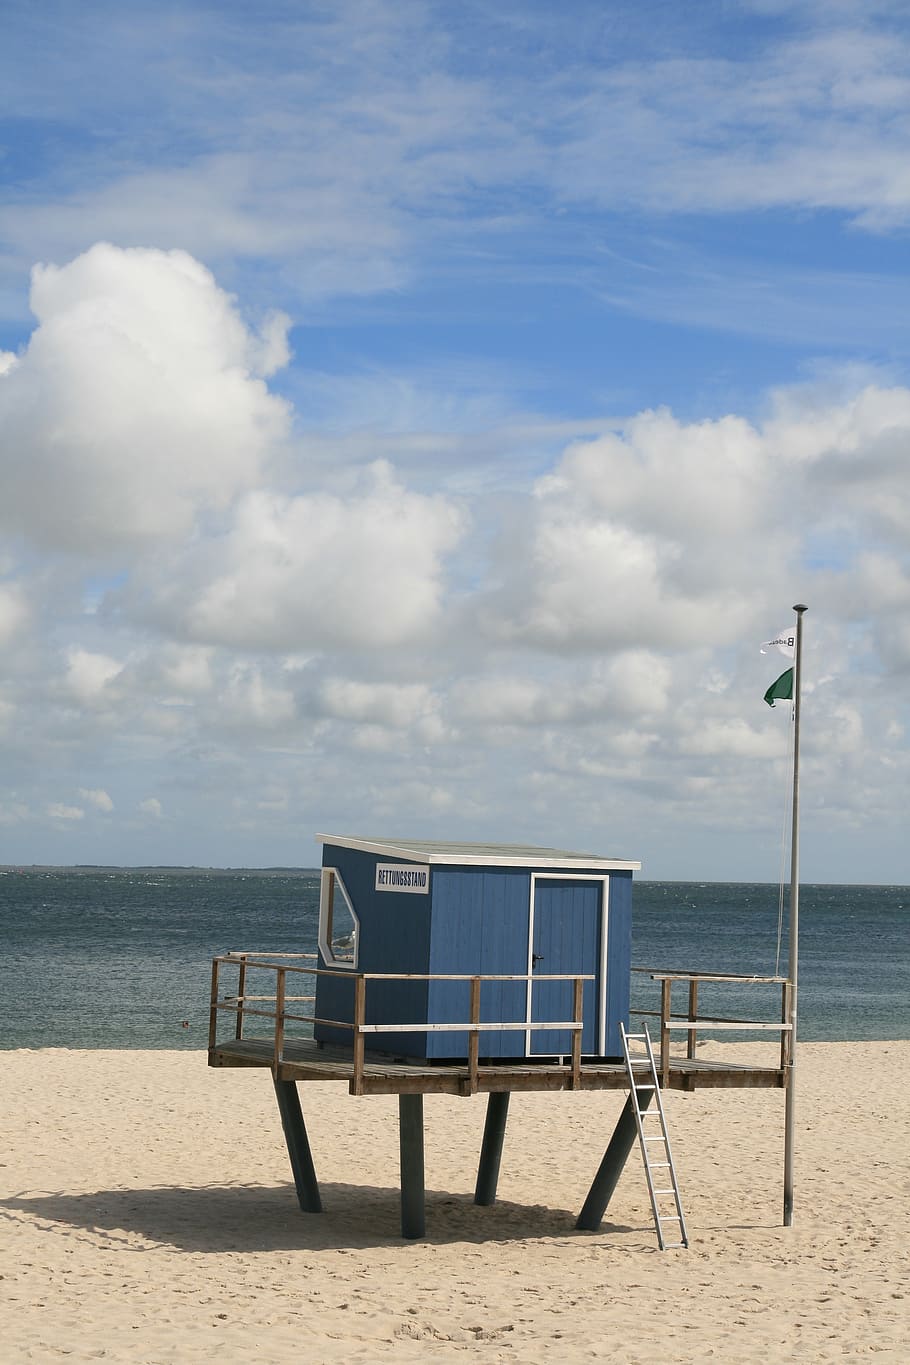 sylt, beach, bathing place, beach rescue, summer, north sea, sky, water, clouds, cloud - sky